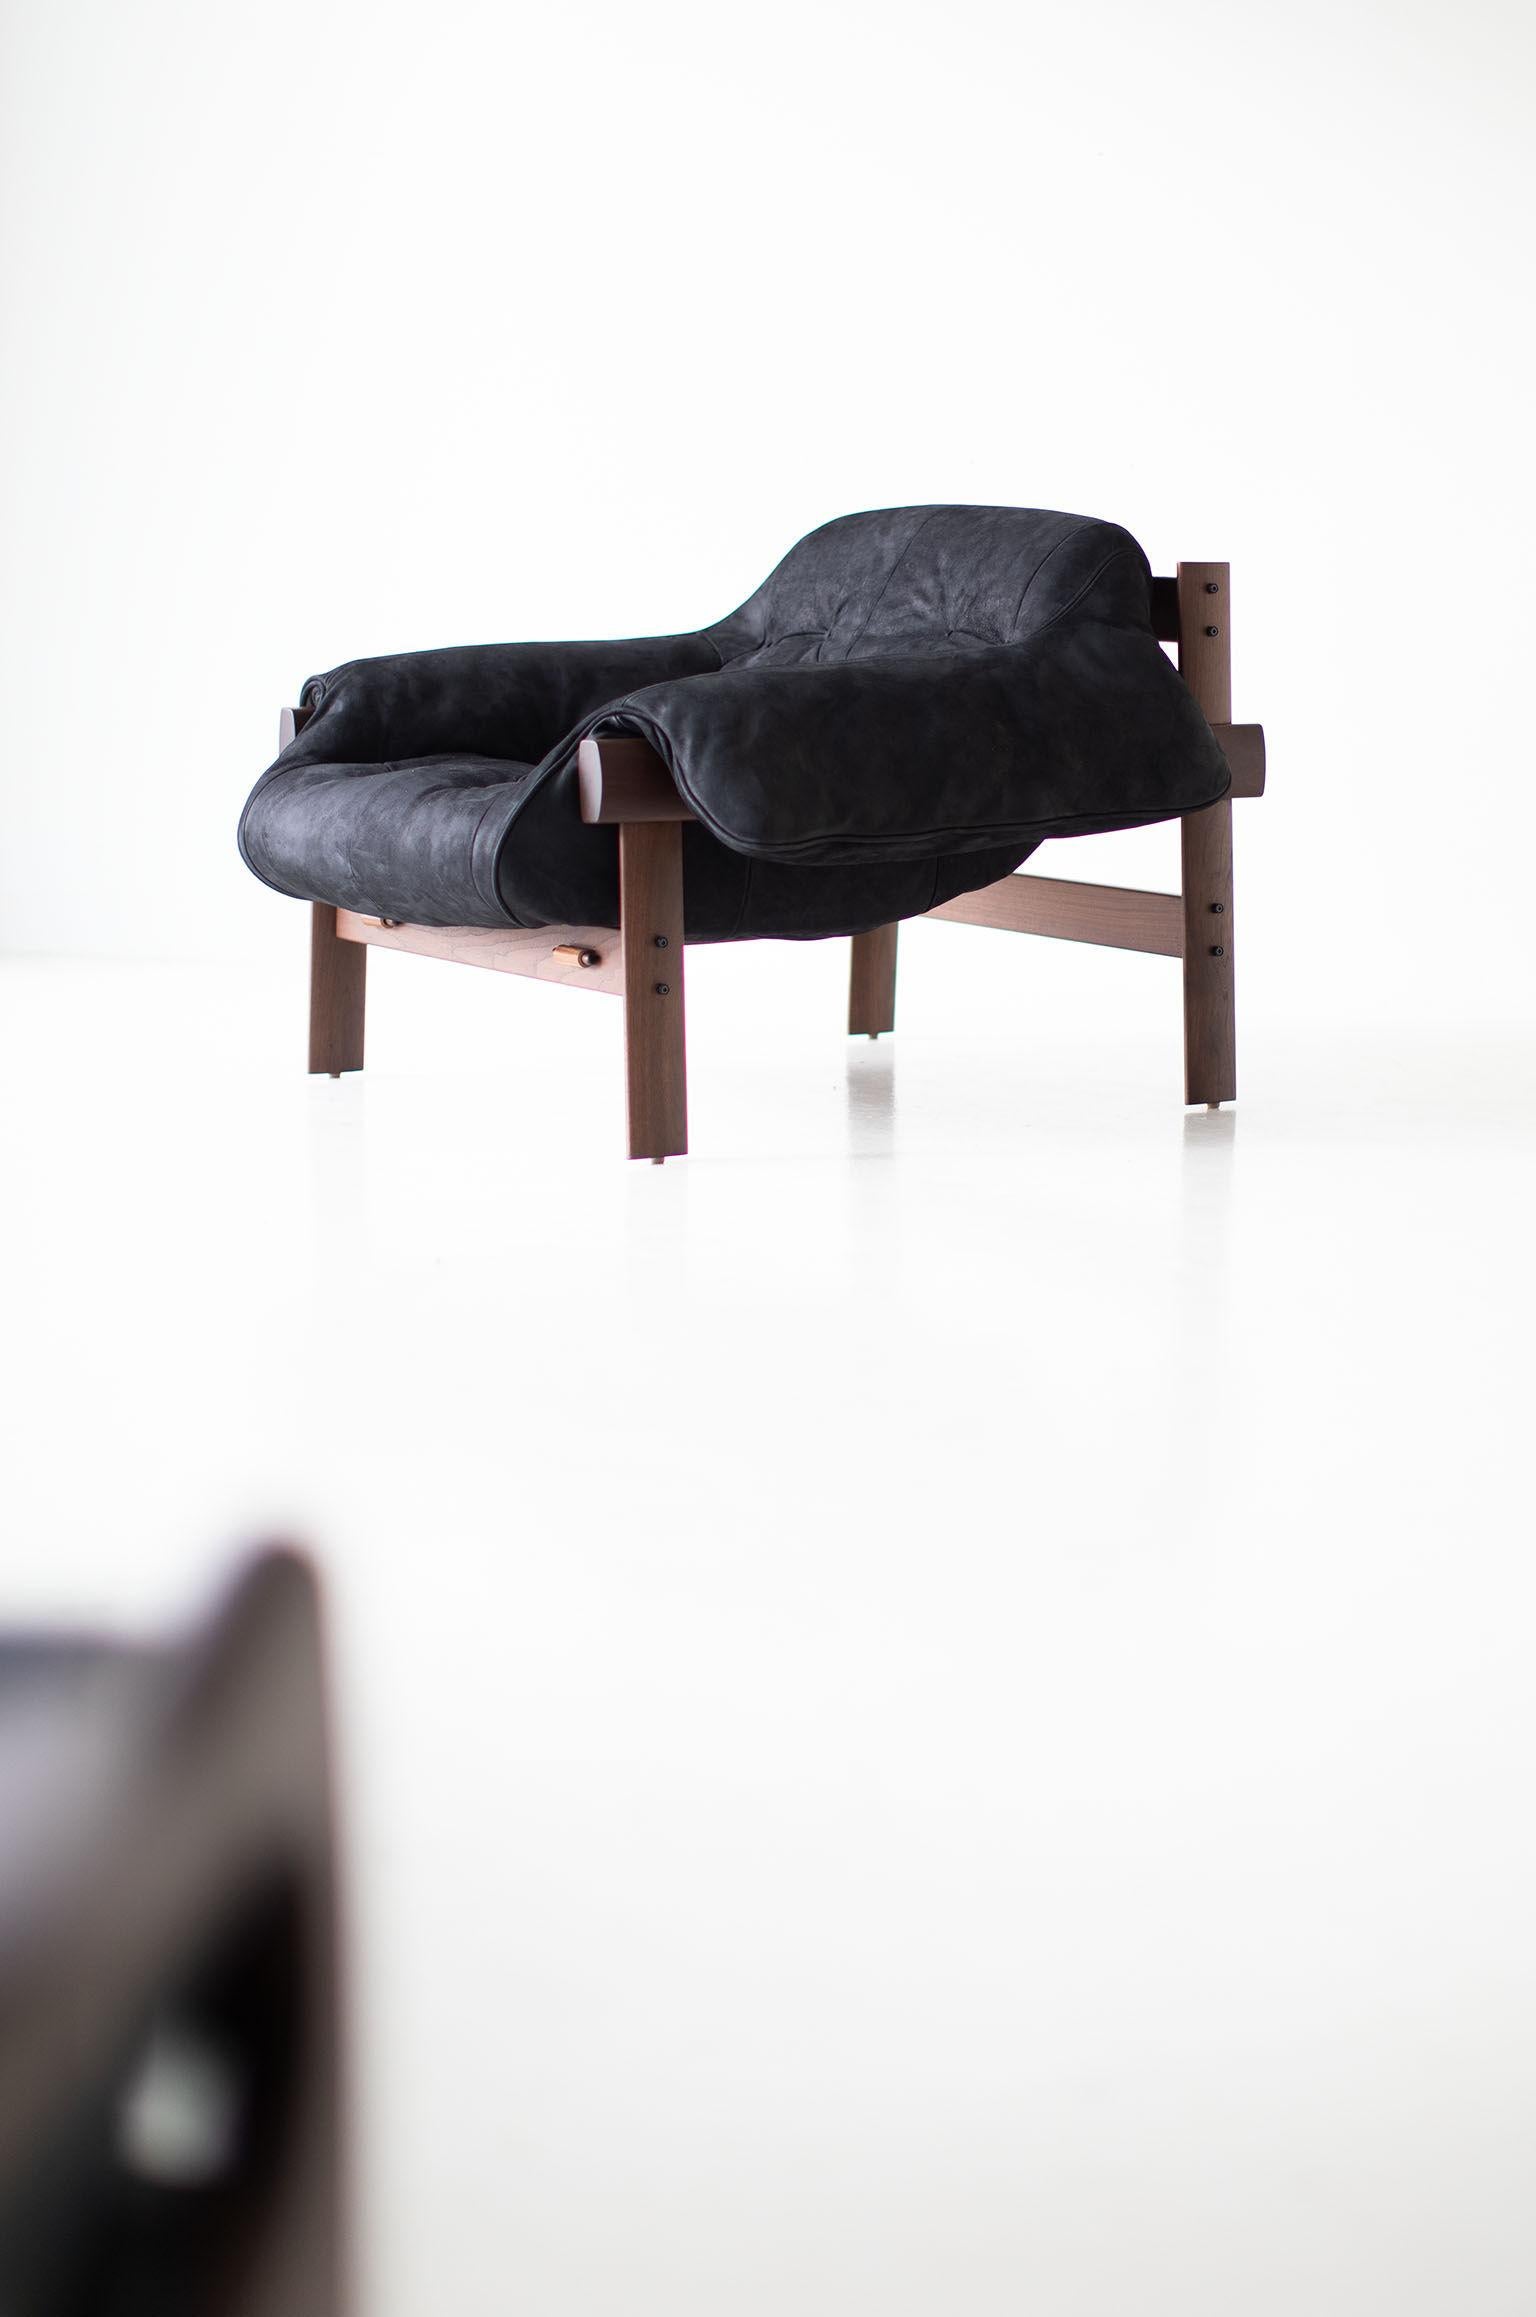 Designer: Percival Lafer

Manufacturer: Craft Associates® Furniture
Period/Model: Mid-Century Modern
Specs: Walnut, leather

These Percival Lafer MP-41 lounge chairs are expertly handcrafted and upholstered. The MP-41 Percival Lafer line is a